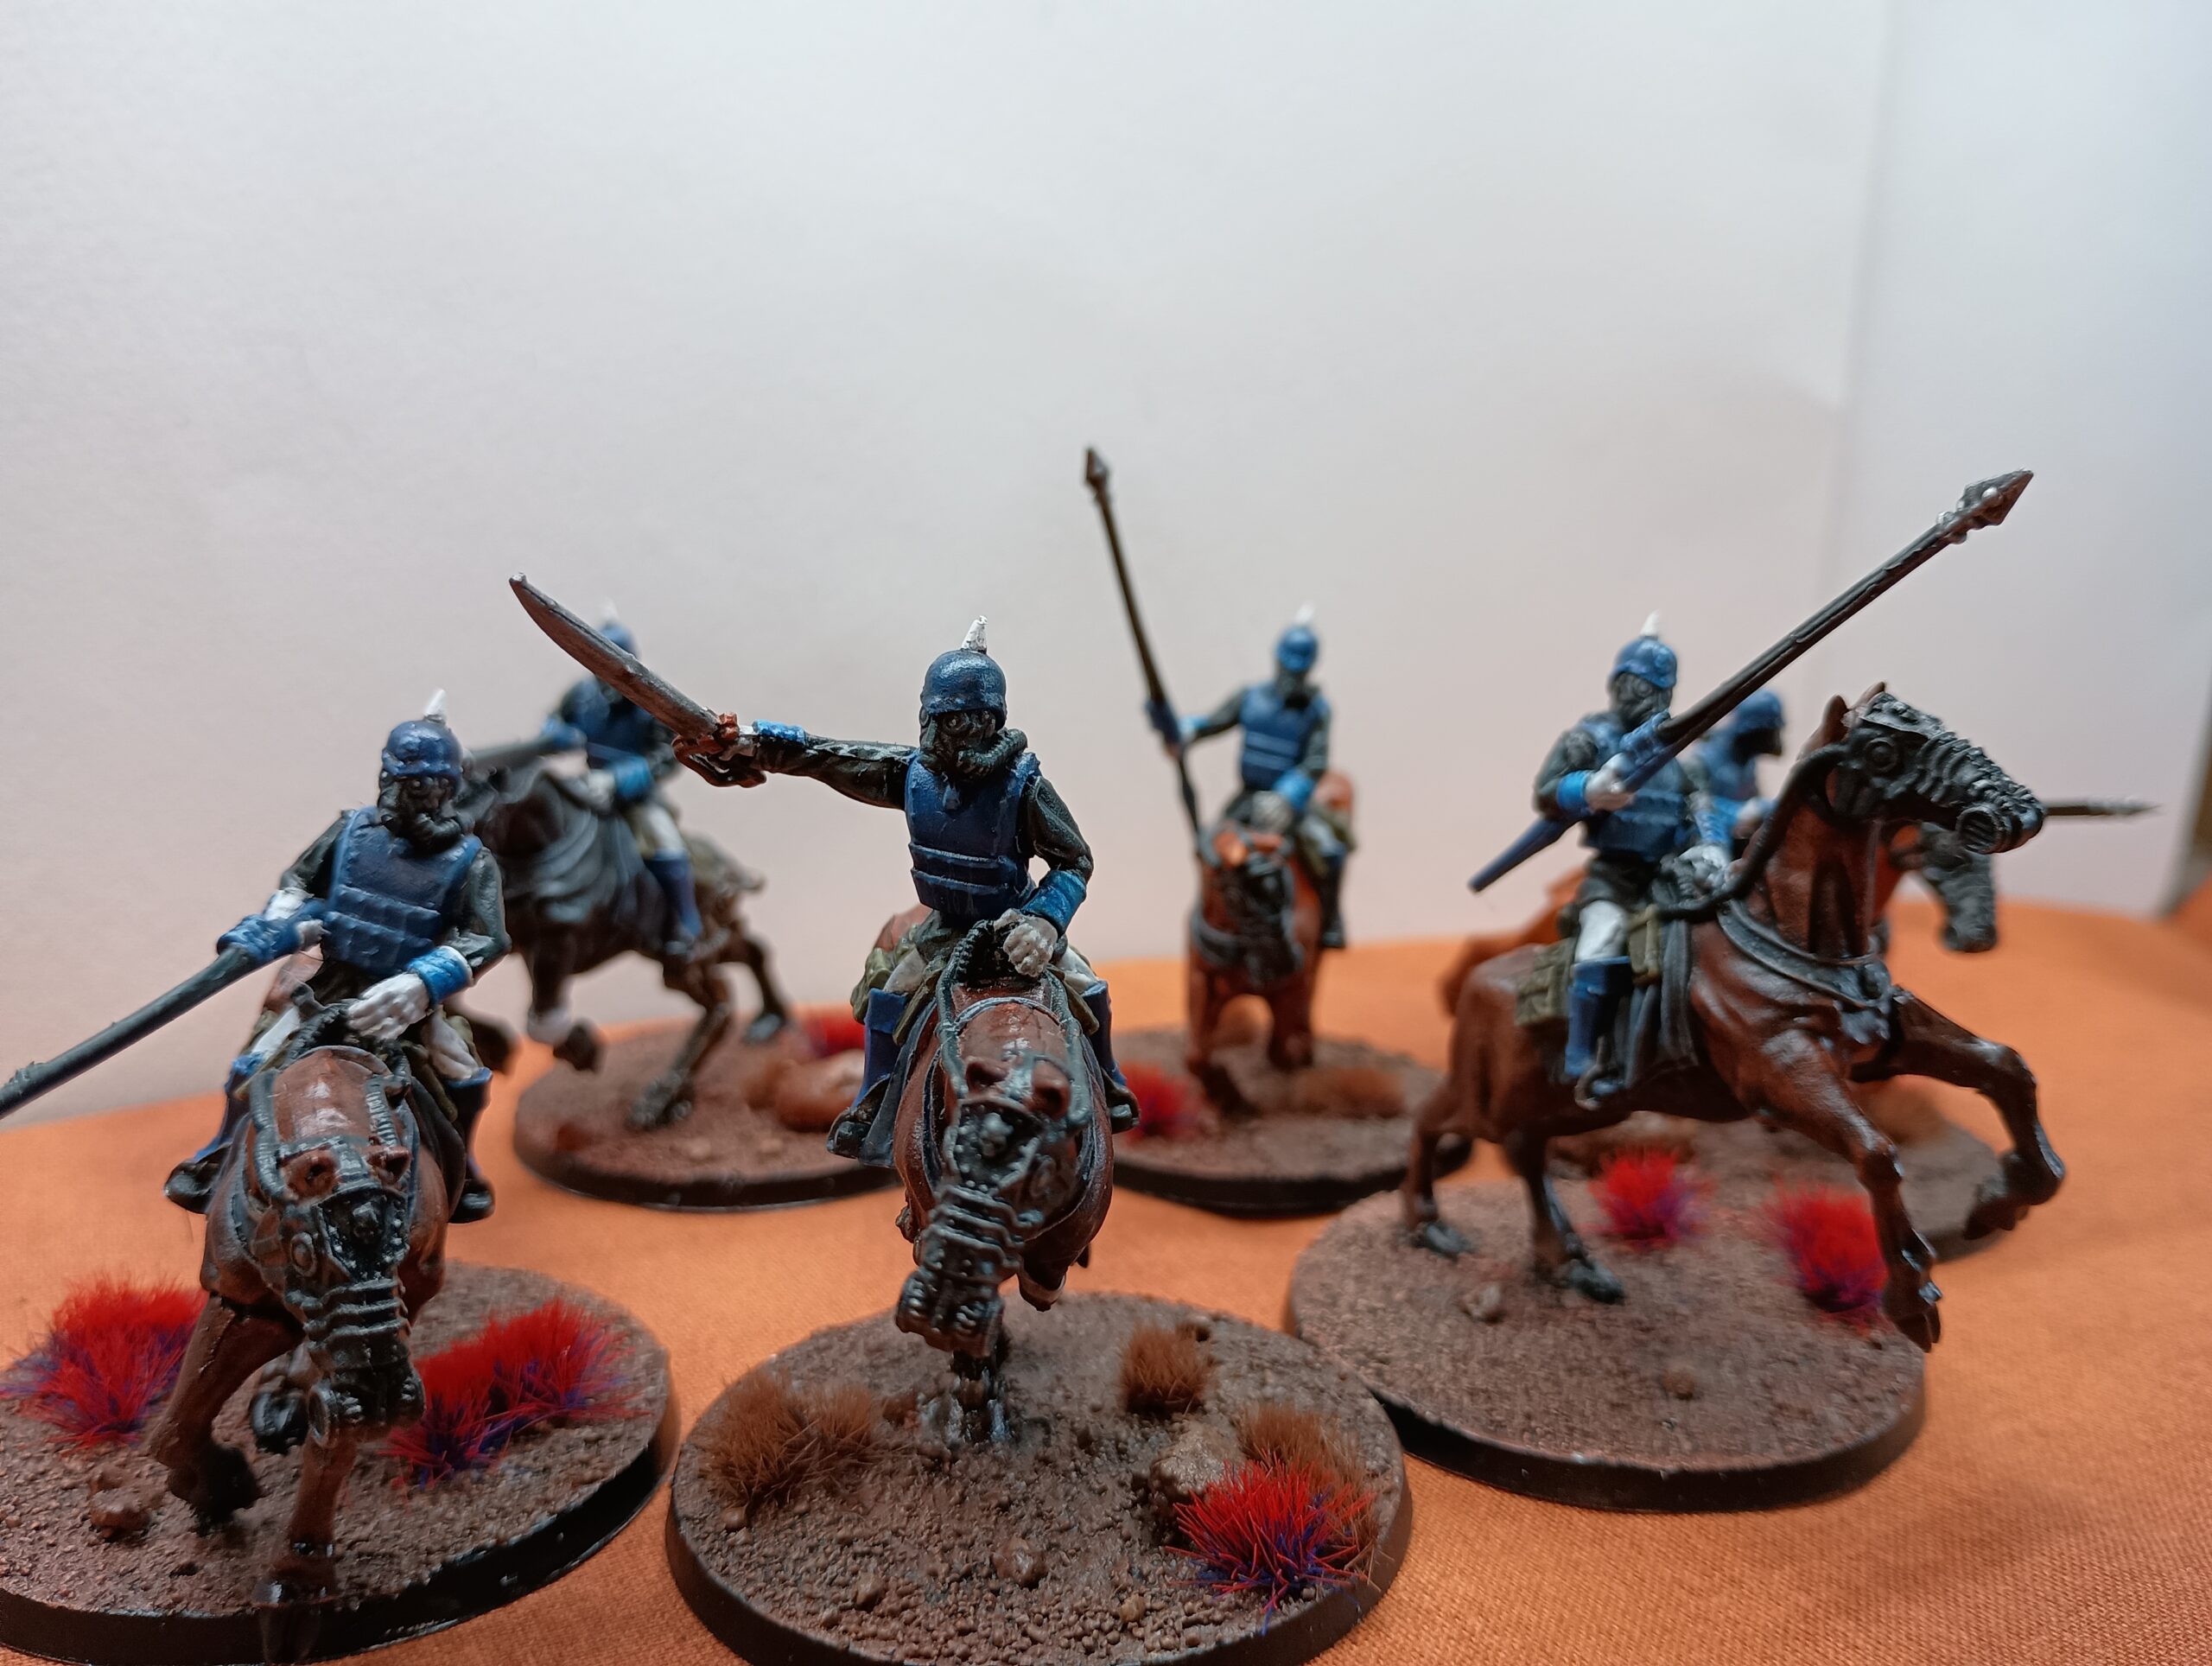 His Columbian Majesty’s Martian Lancers